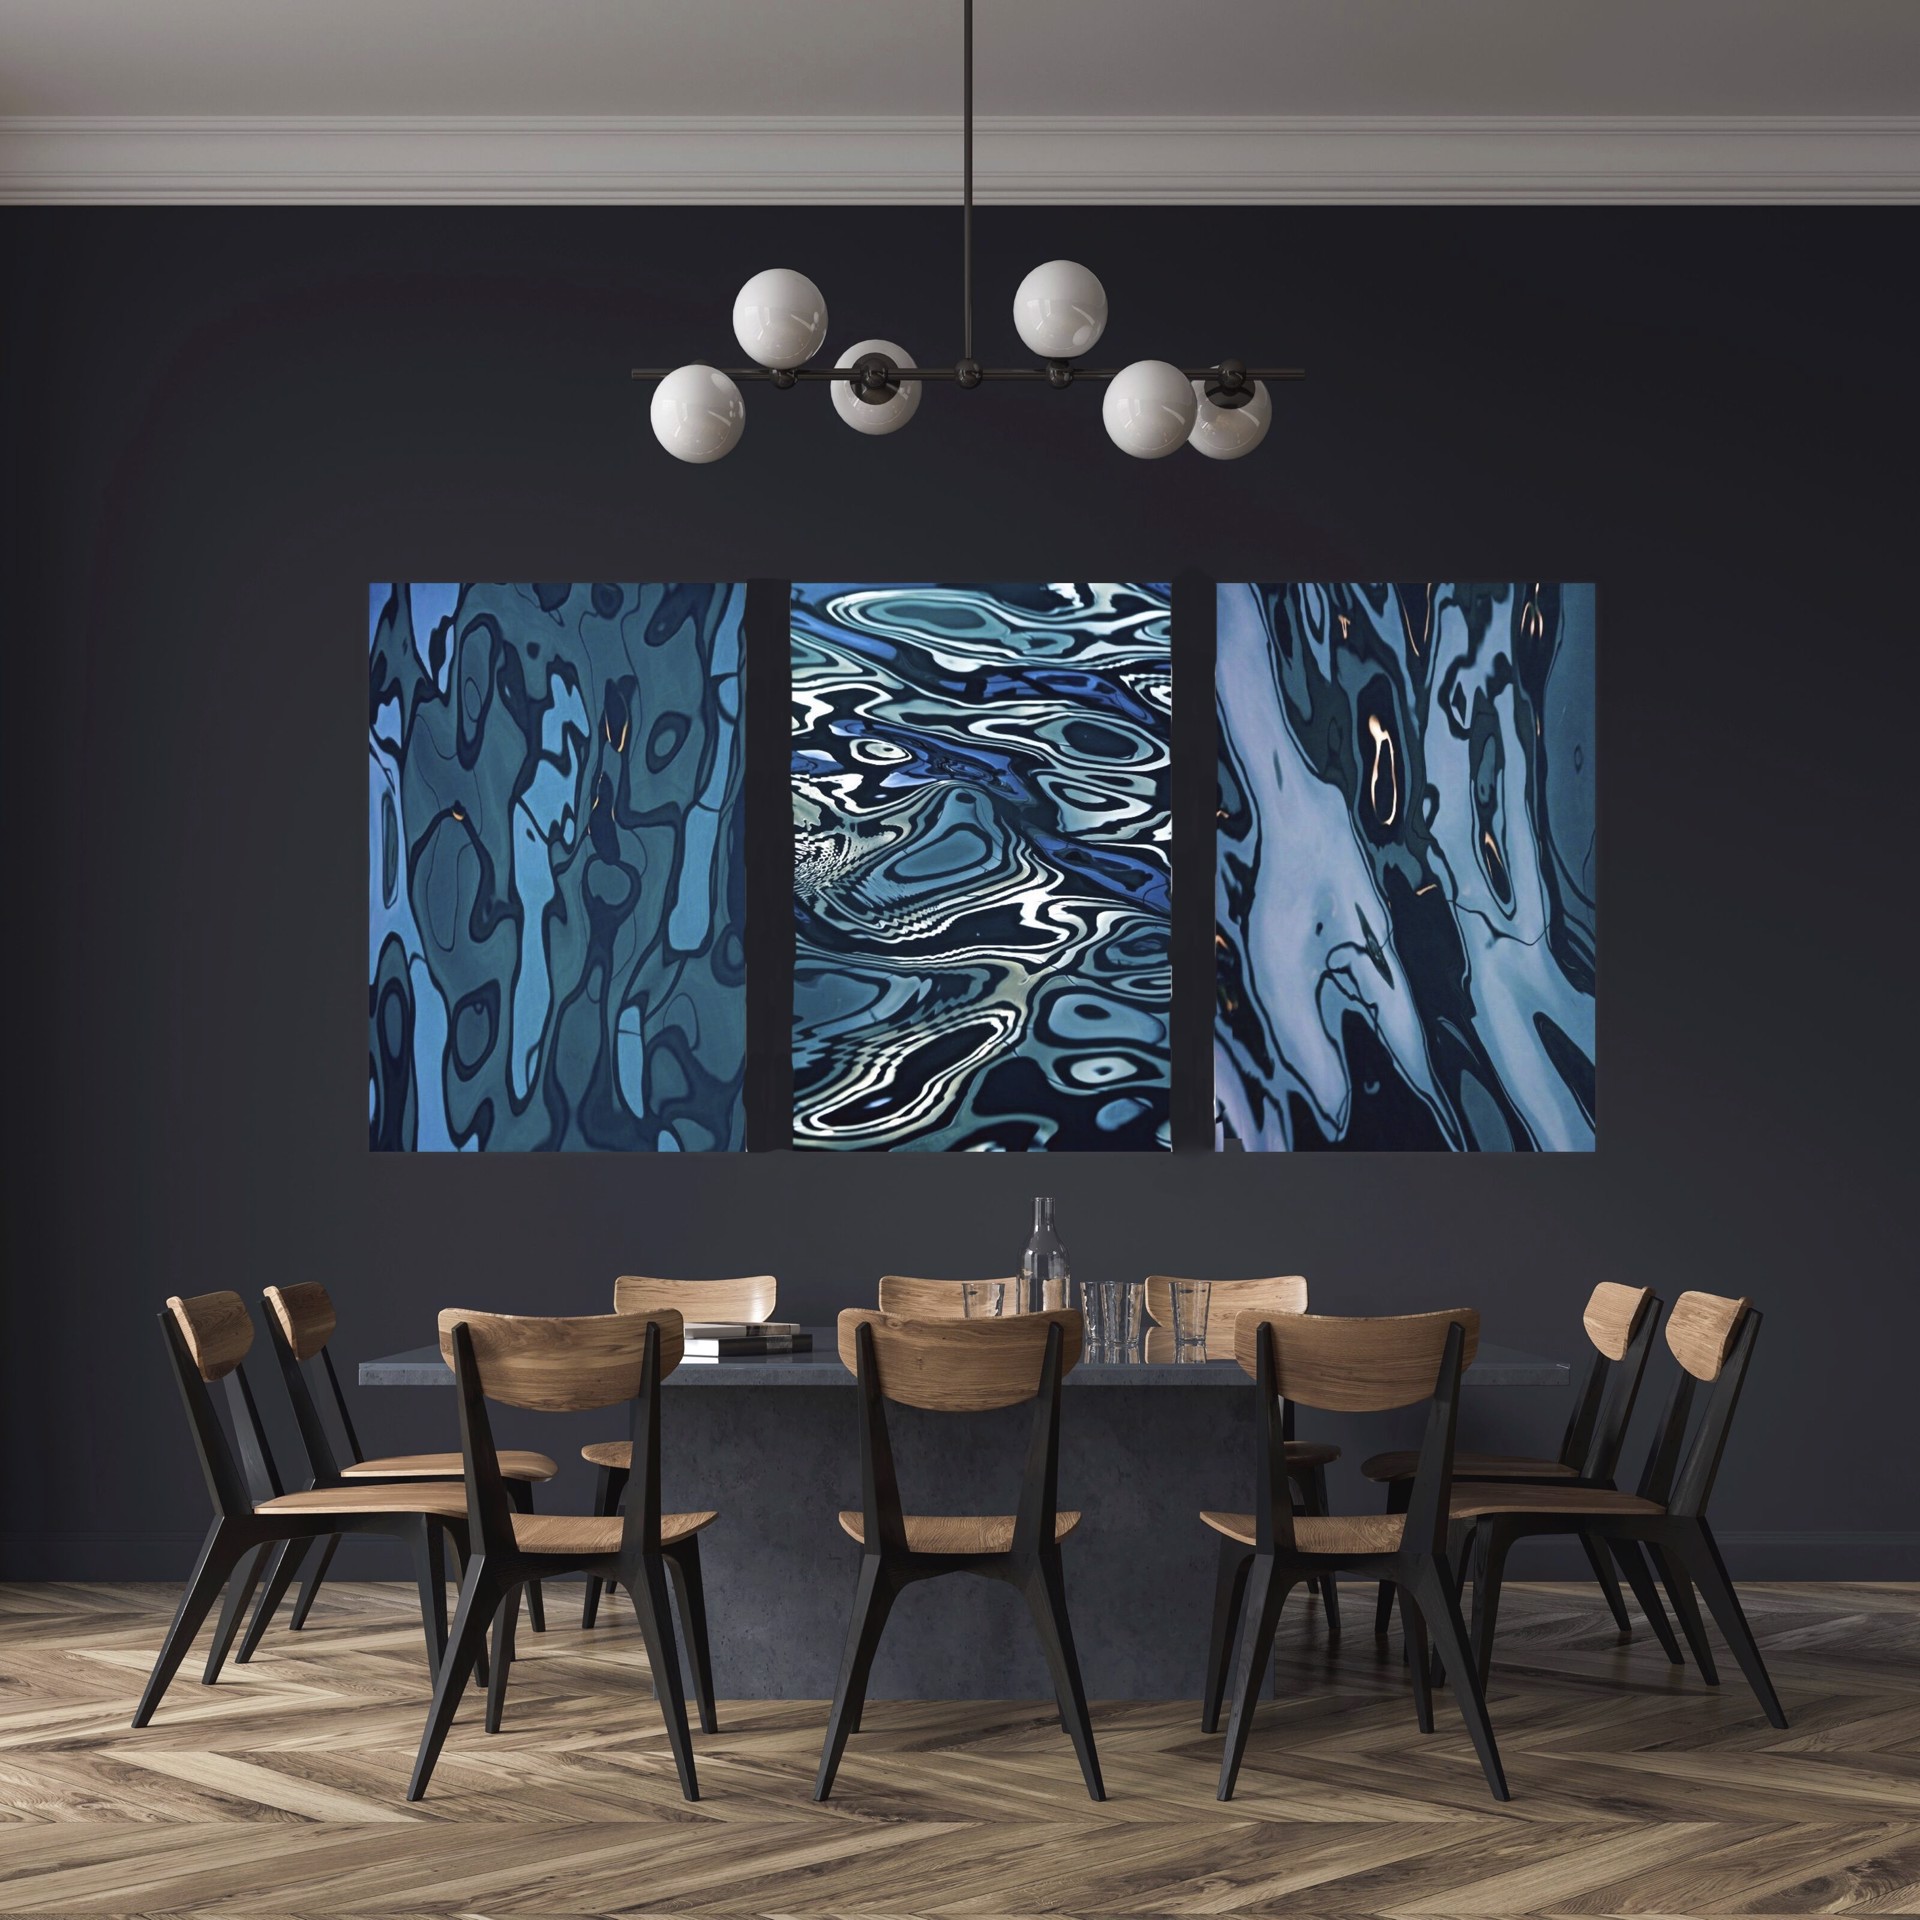 Triptych (Custom Sizes and Framing Also Available) by Lynn Savarese